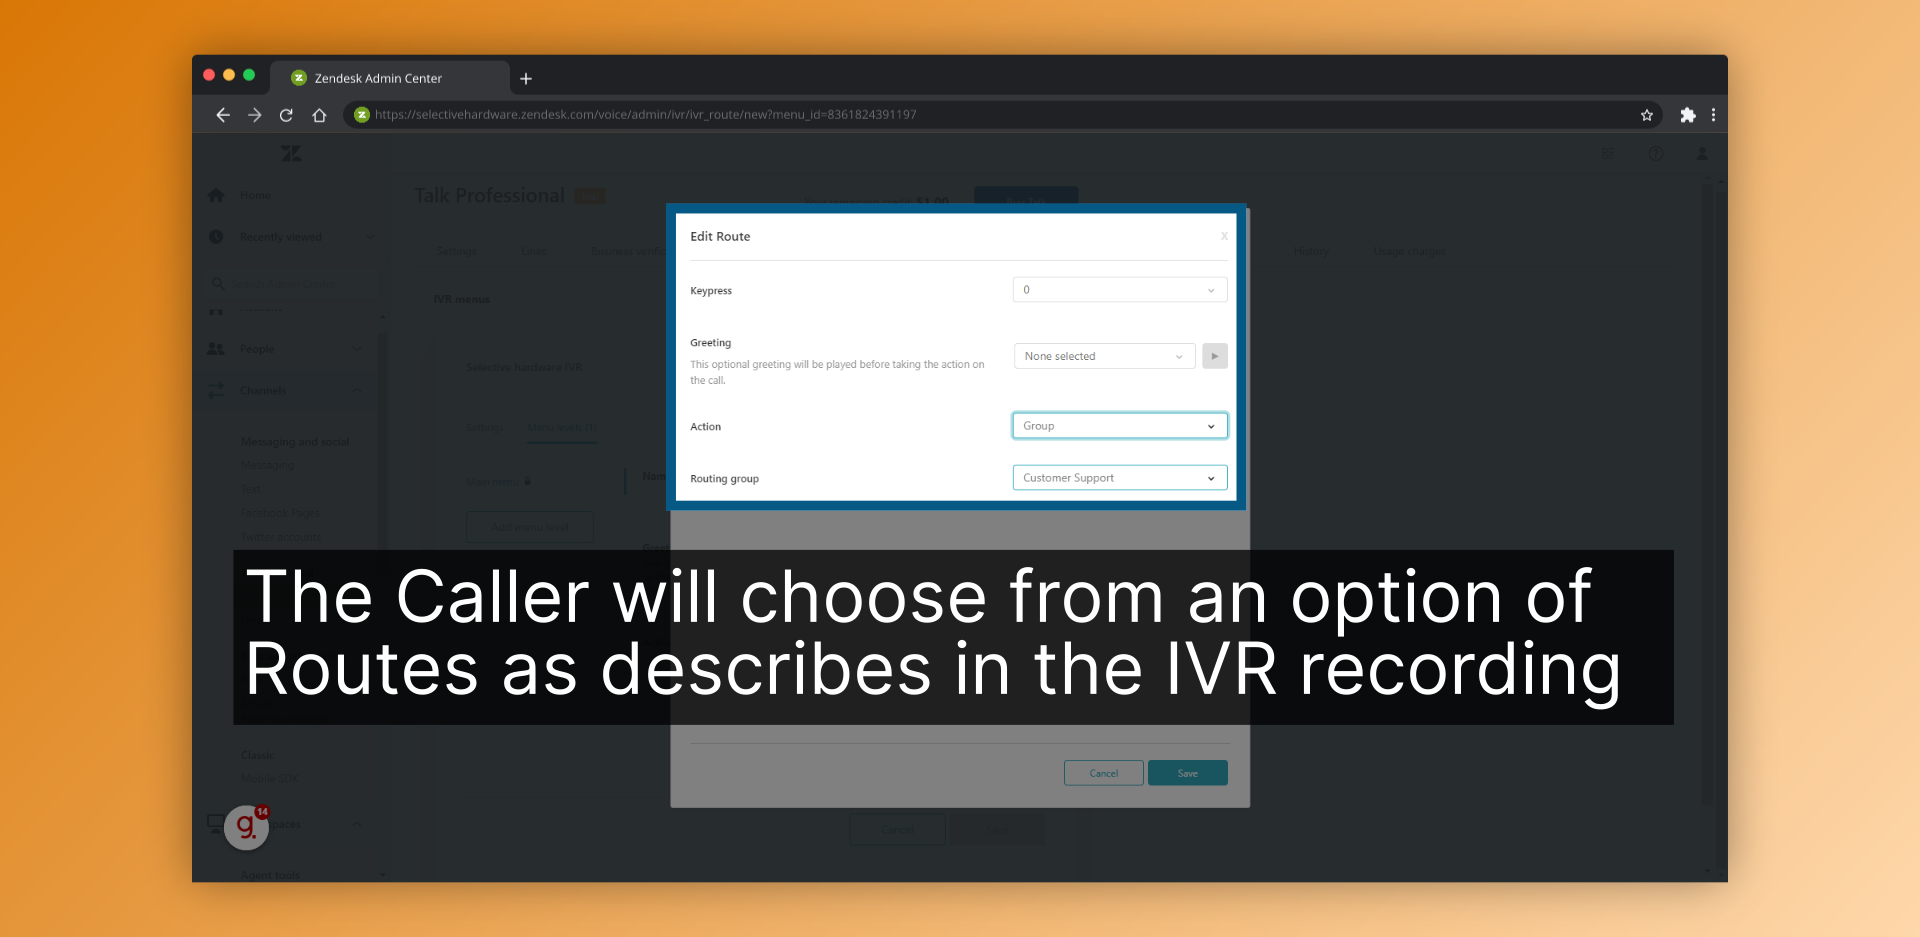 The Caller will choose from an option of Routes as describes in the IVR recording